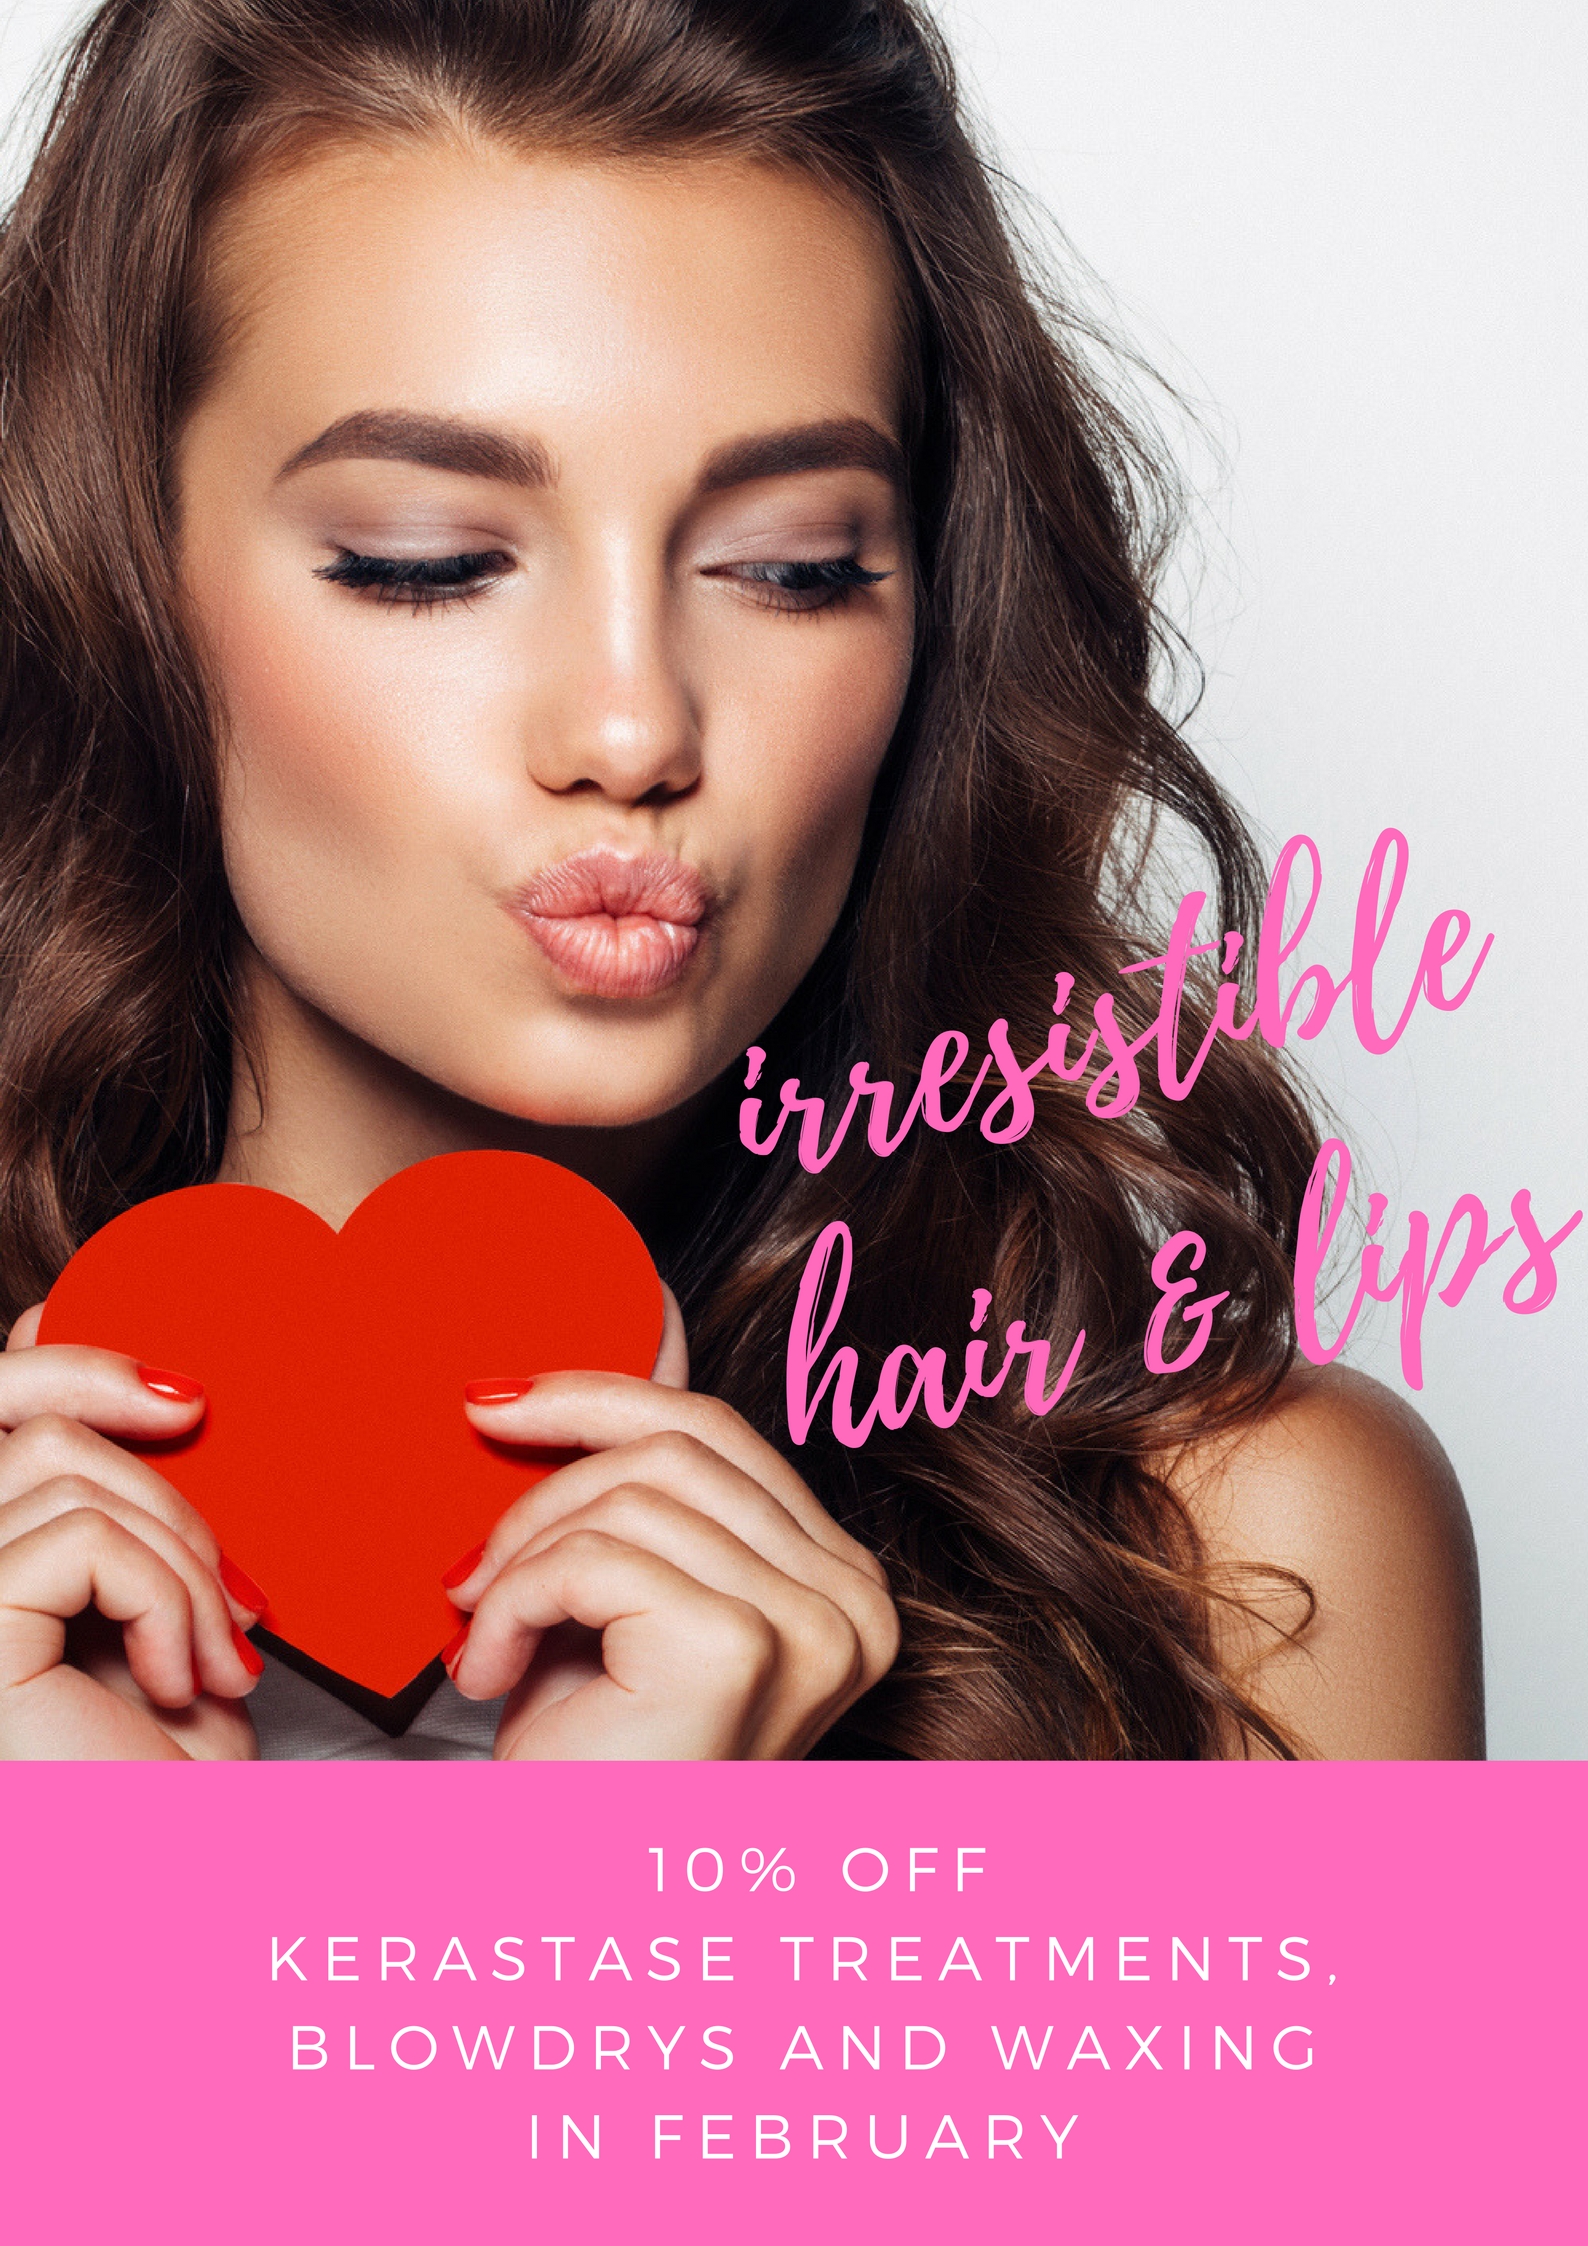 Irresistible hair and lips - February Offer